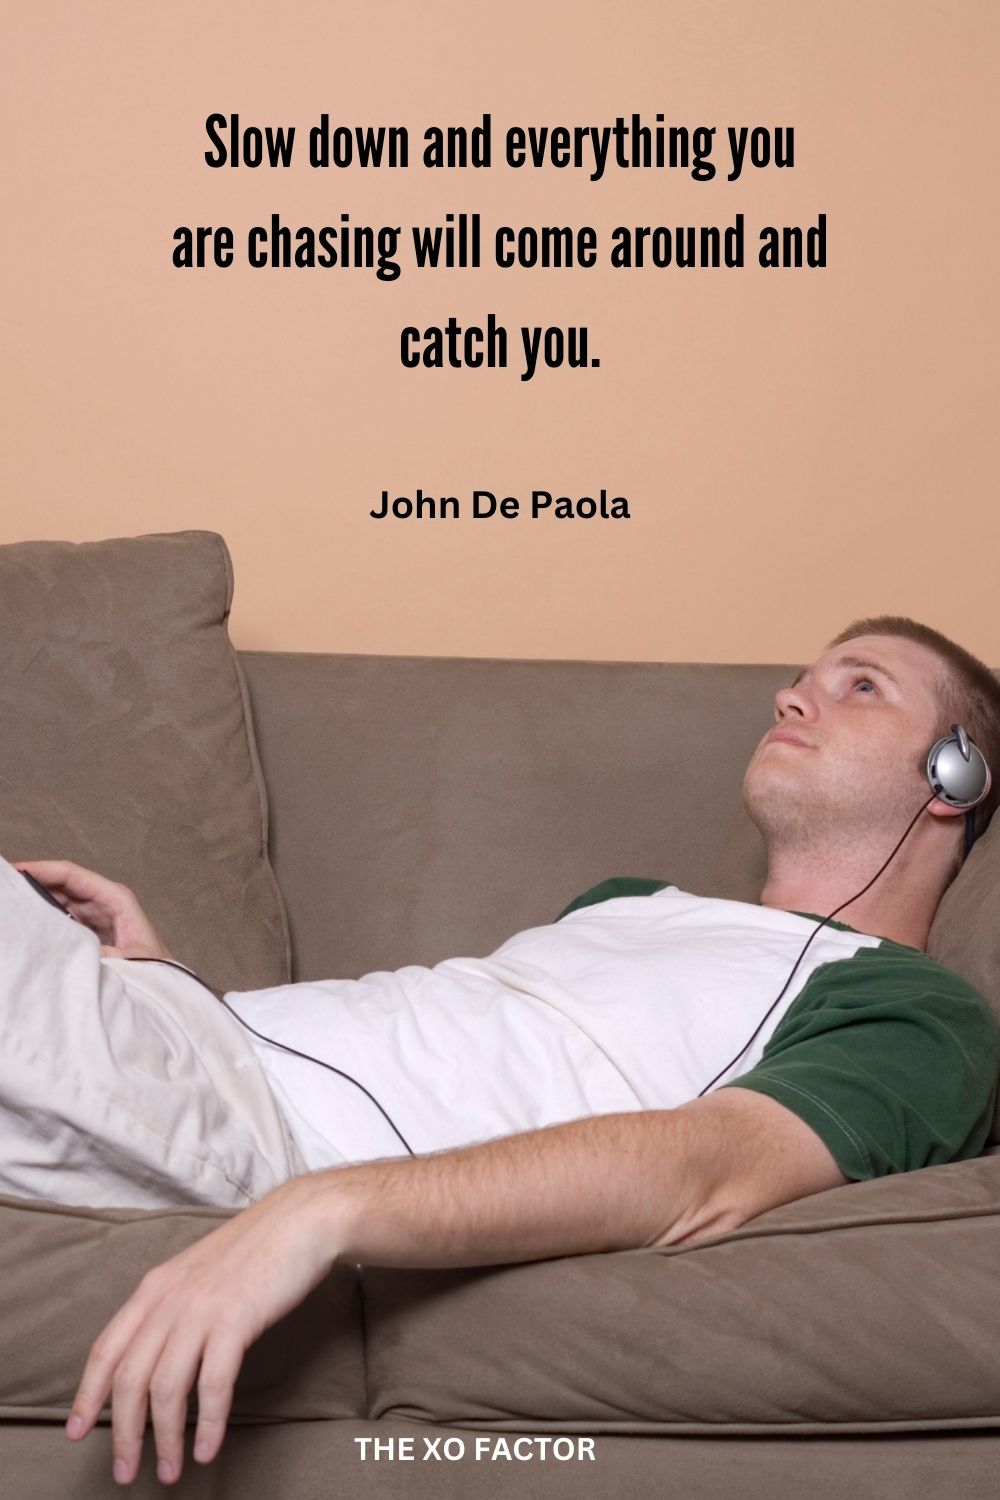 Slow down and everything you are chasing will come around and catch you.
John De Paola